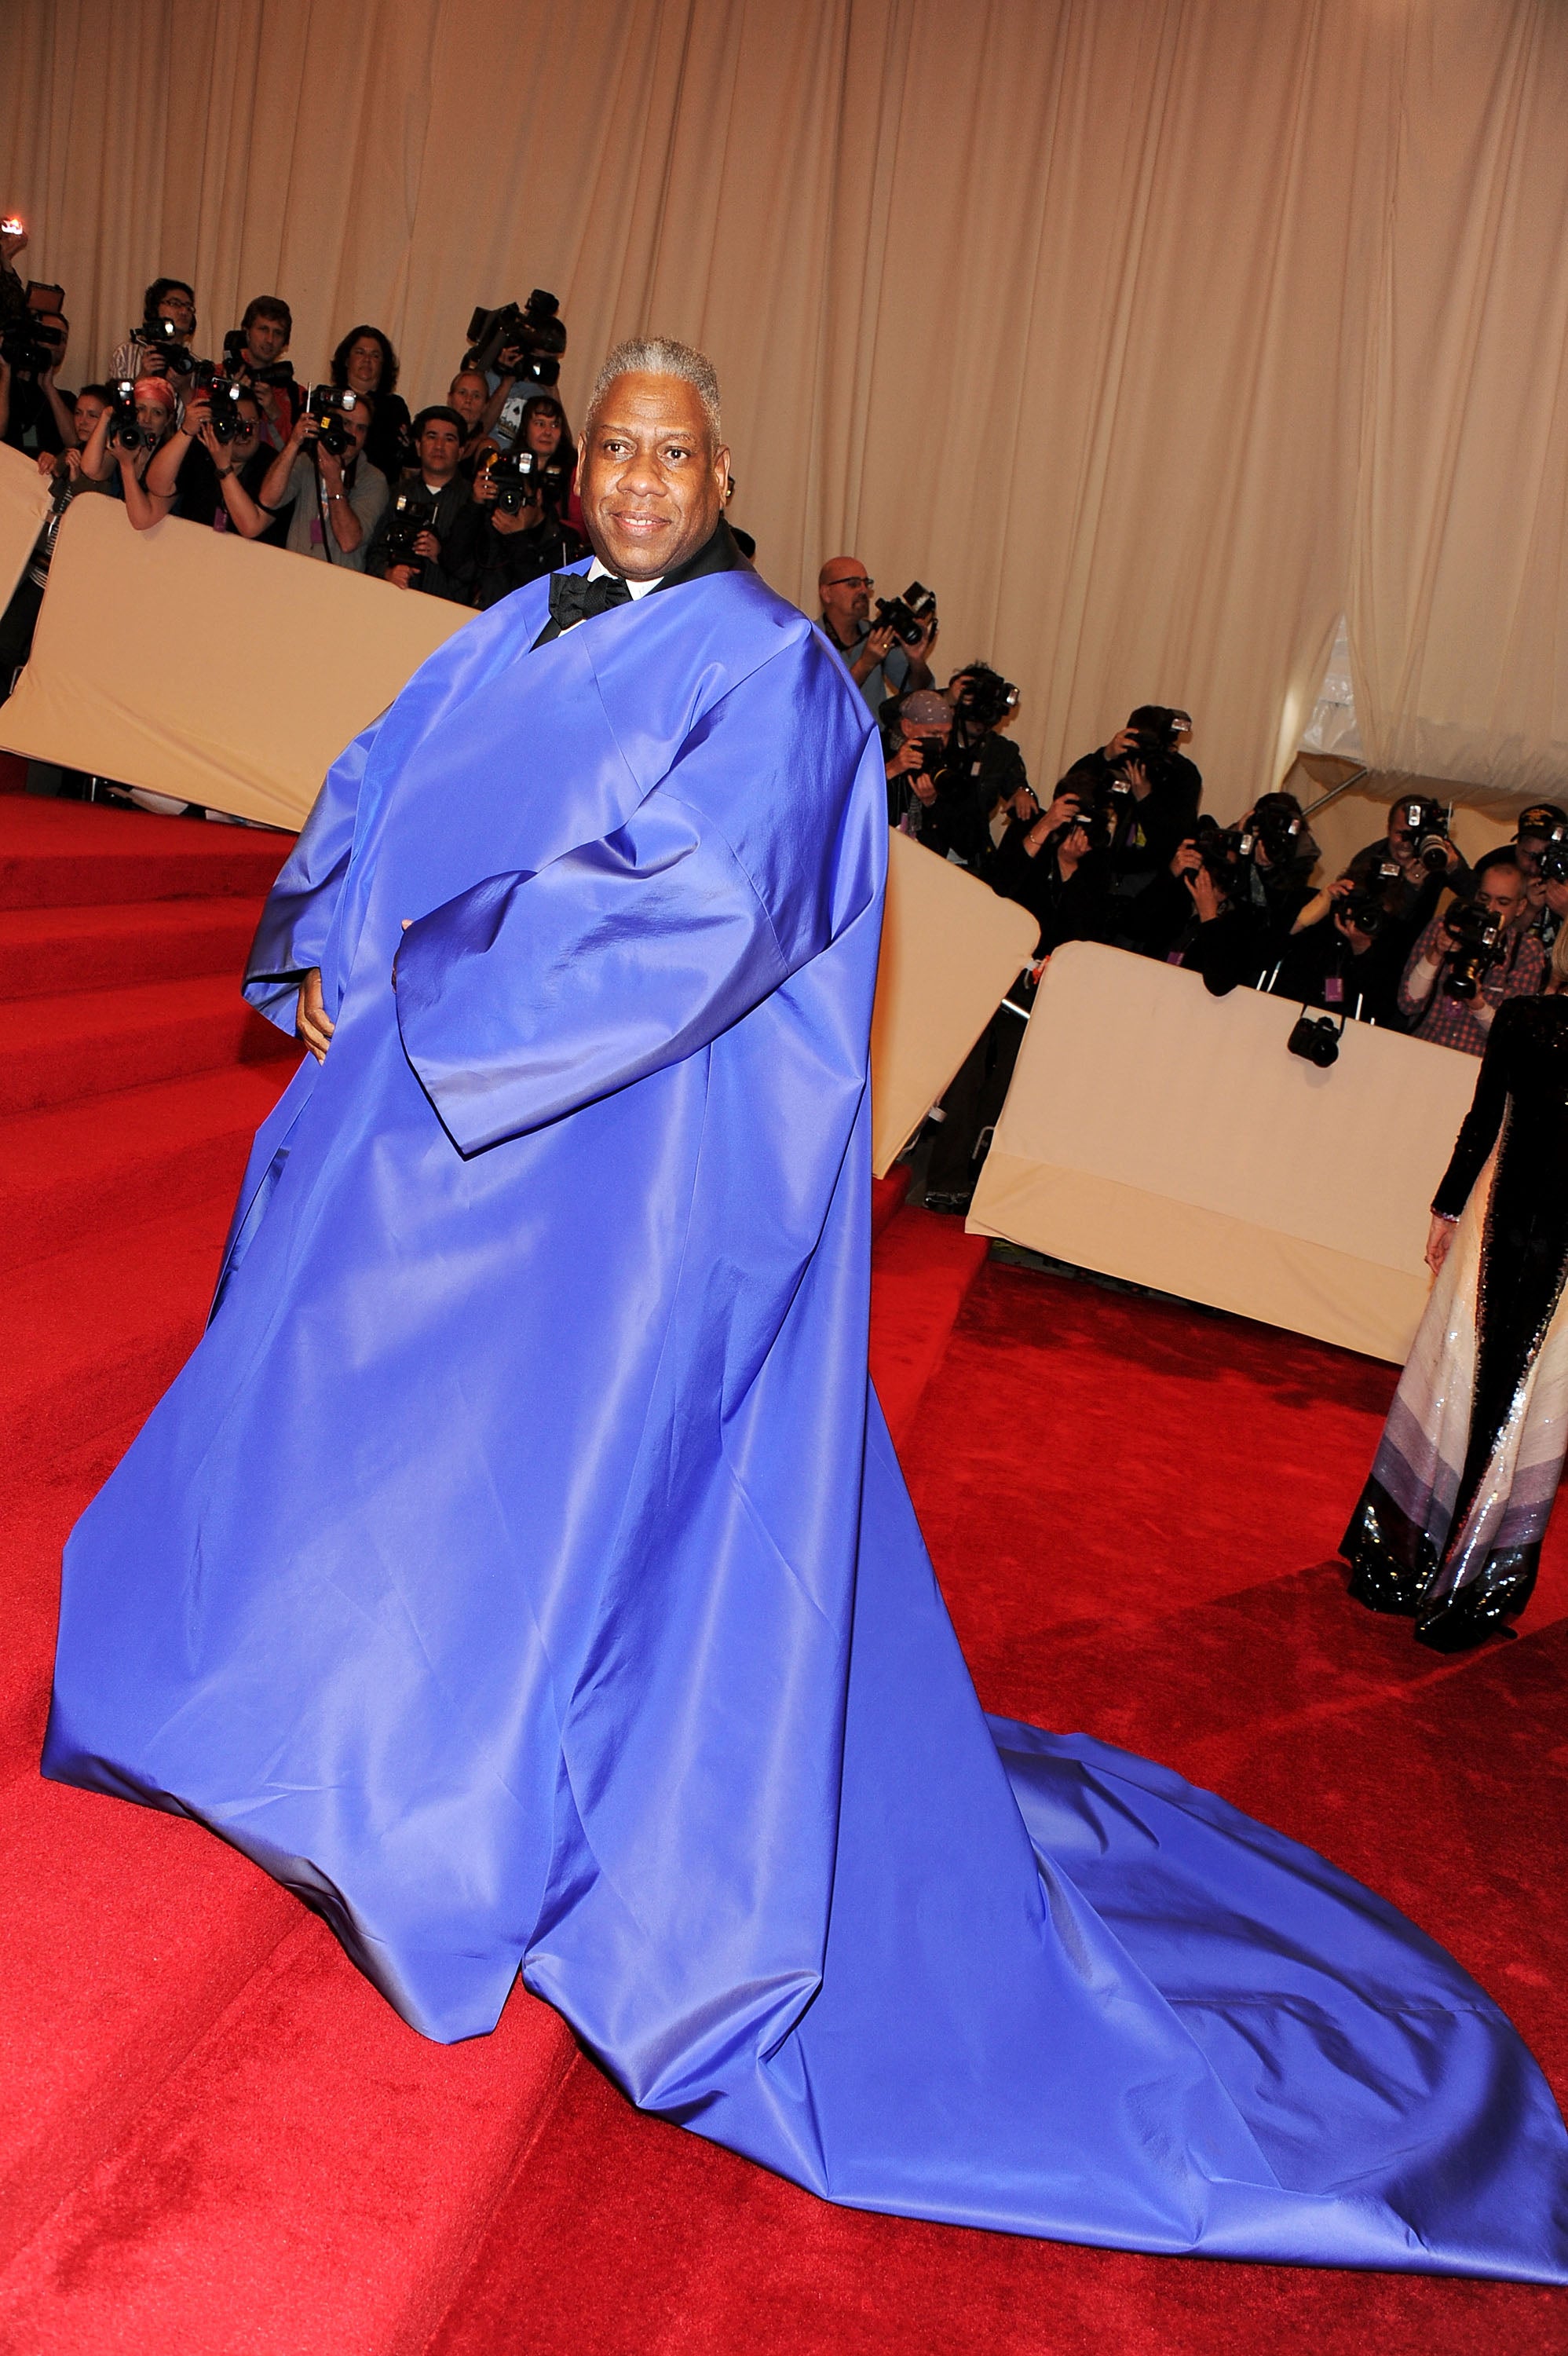 Andre Leon Talley attends the "Alexander McQueen: Savage Beauty" Costume Institute Gala at The Metropolitan Museum of Art on May 2, 2011